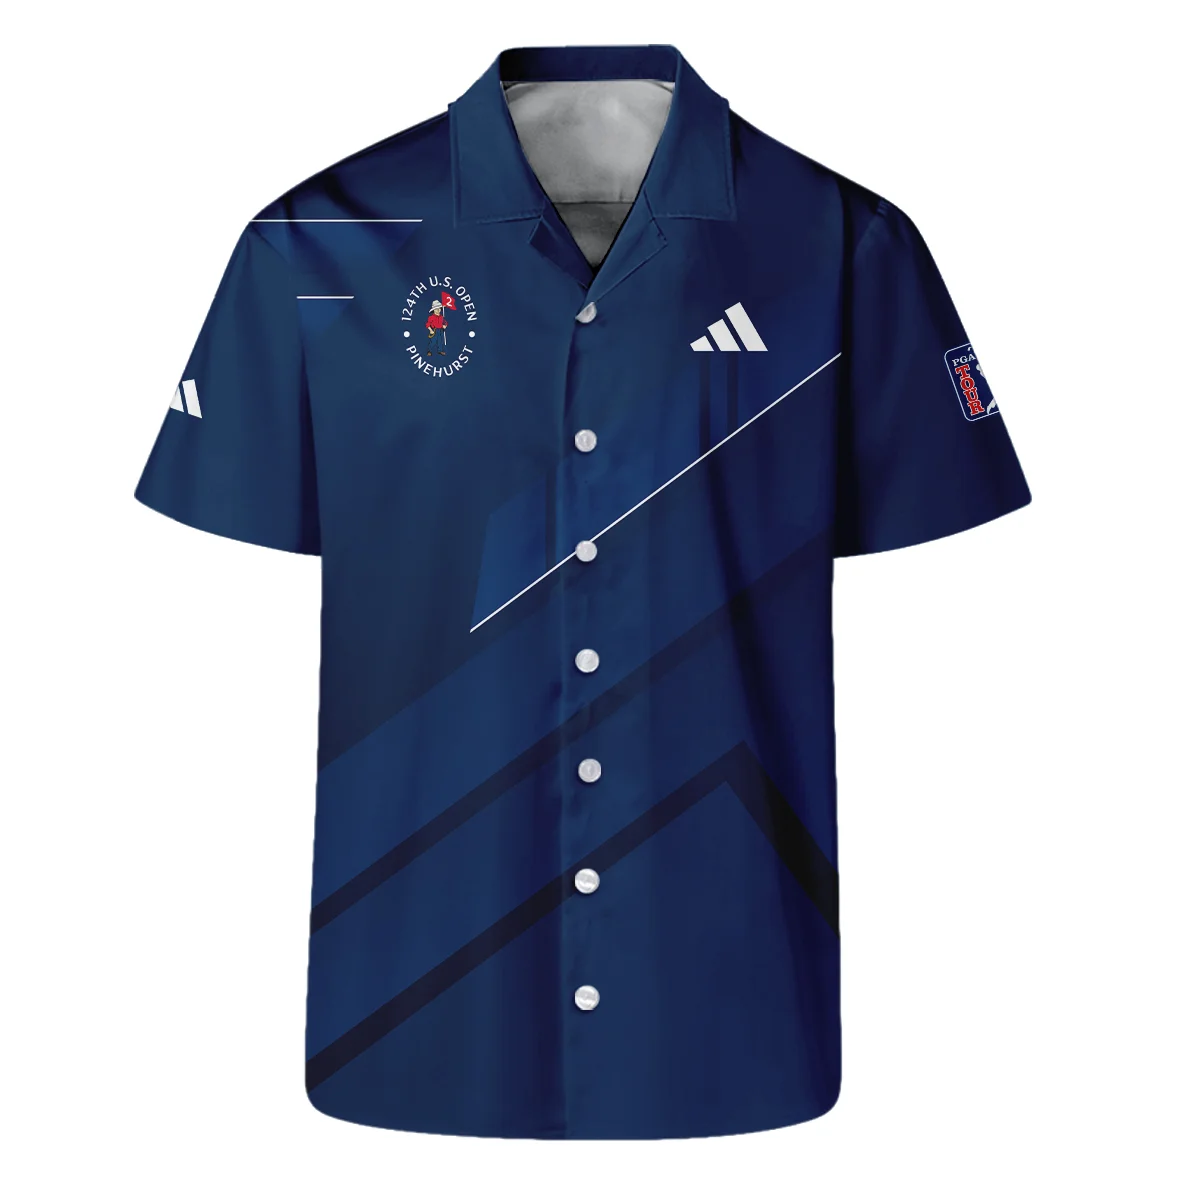 Adidas 124th U.S. Open Pinehurst Blue Gradient With White Straight Line Polo Shirt Style Classic Polo Shirt For Men